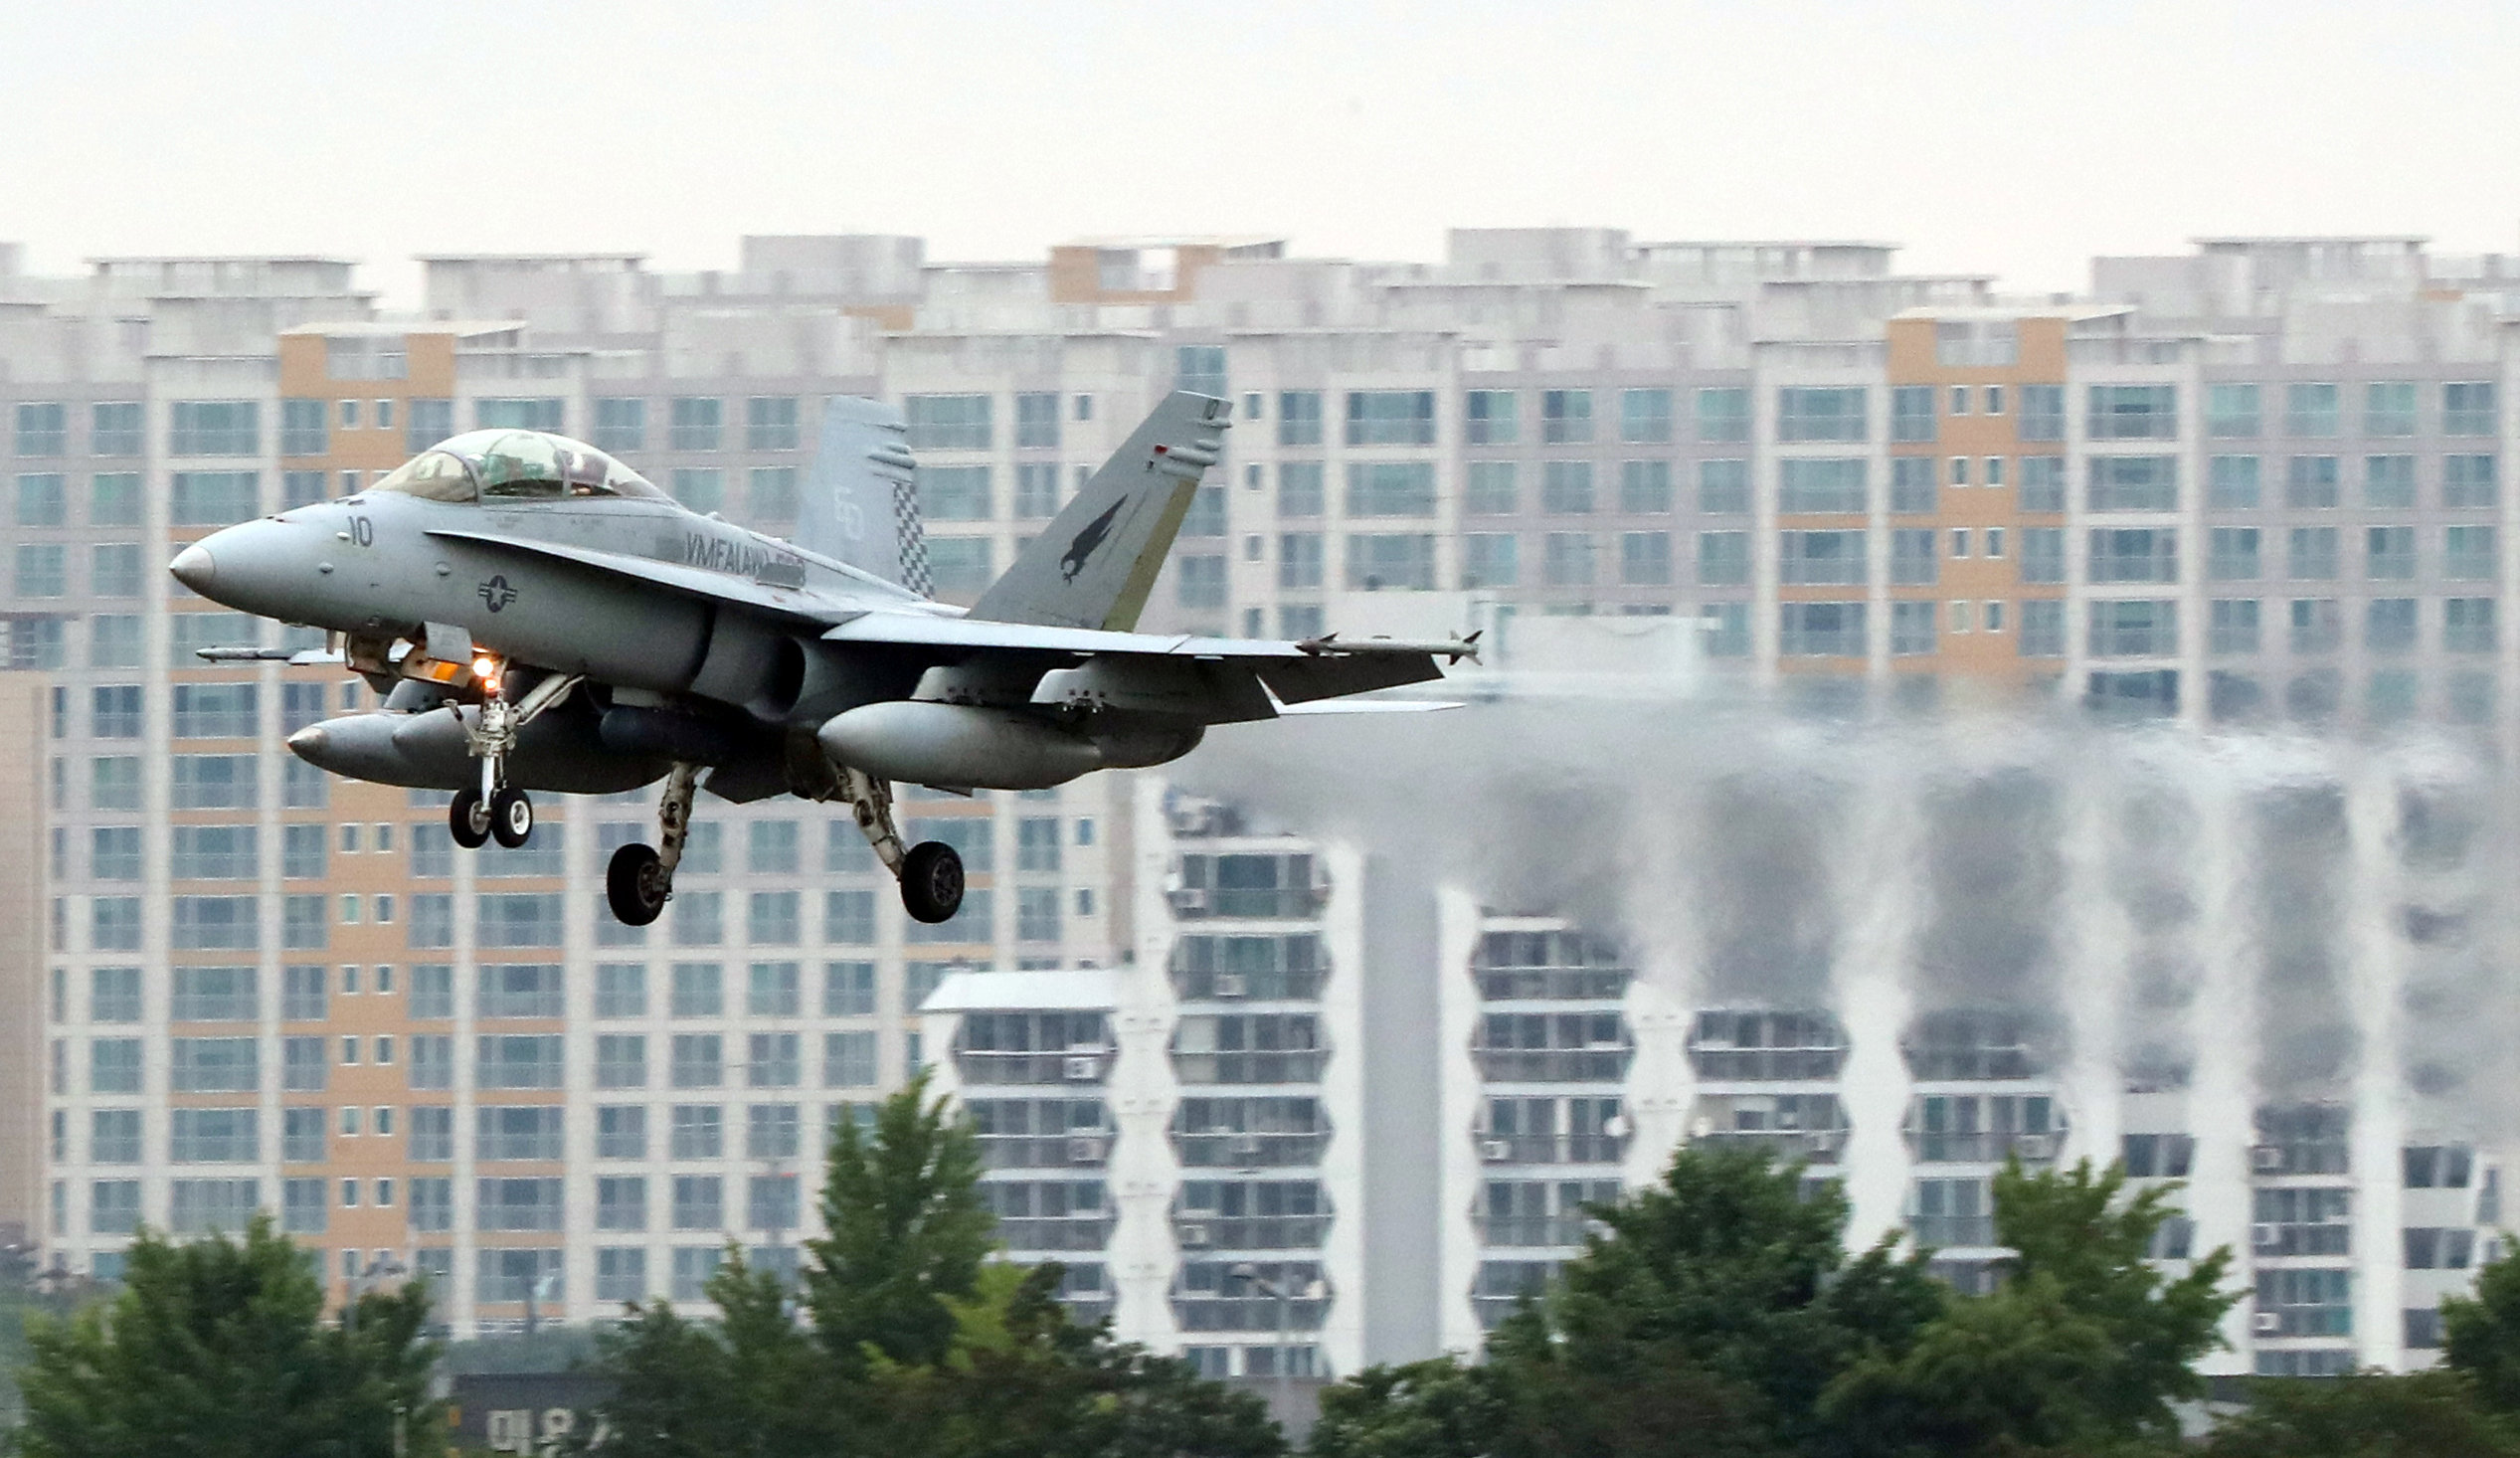 A fighter jet takes off from an airbase in Gwangju